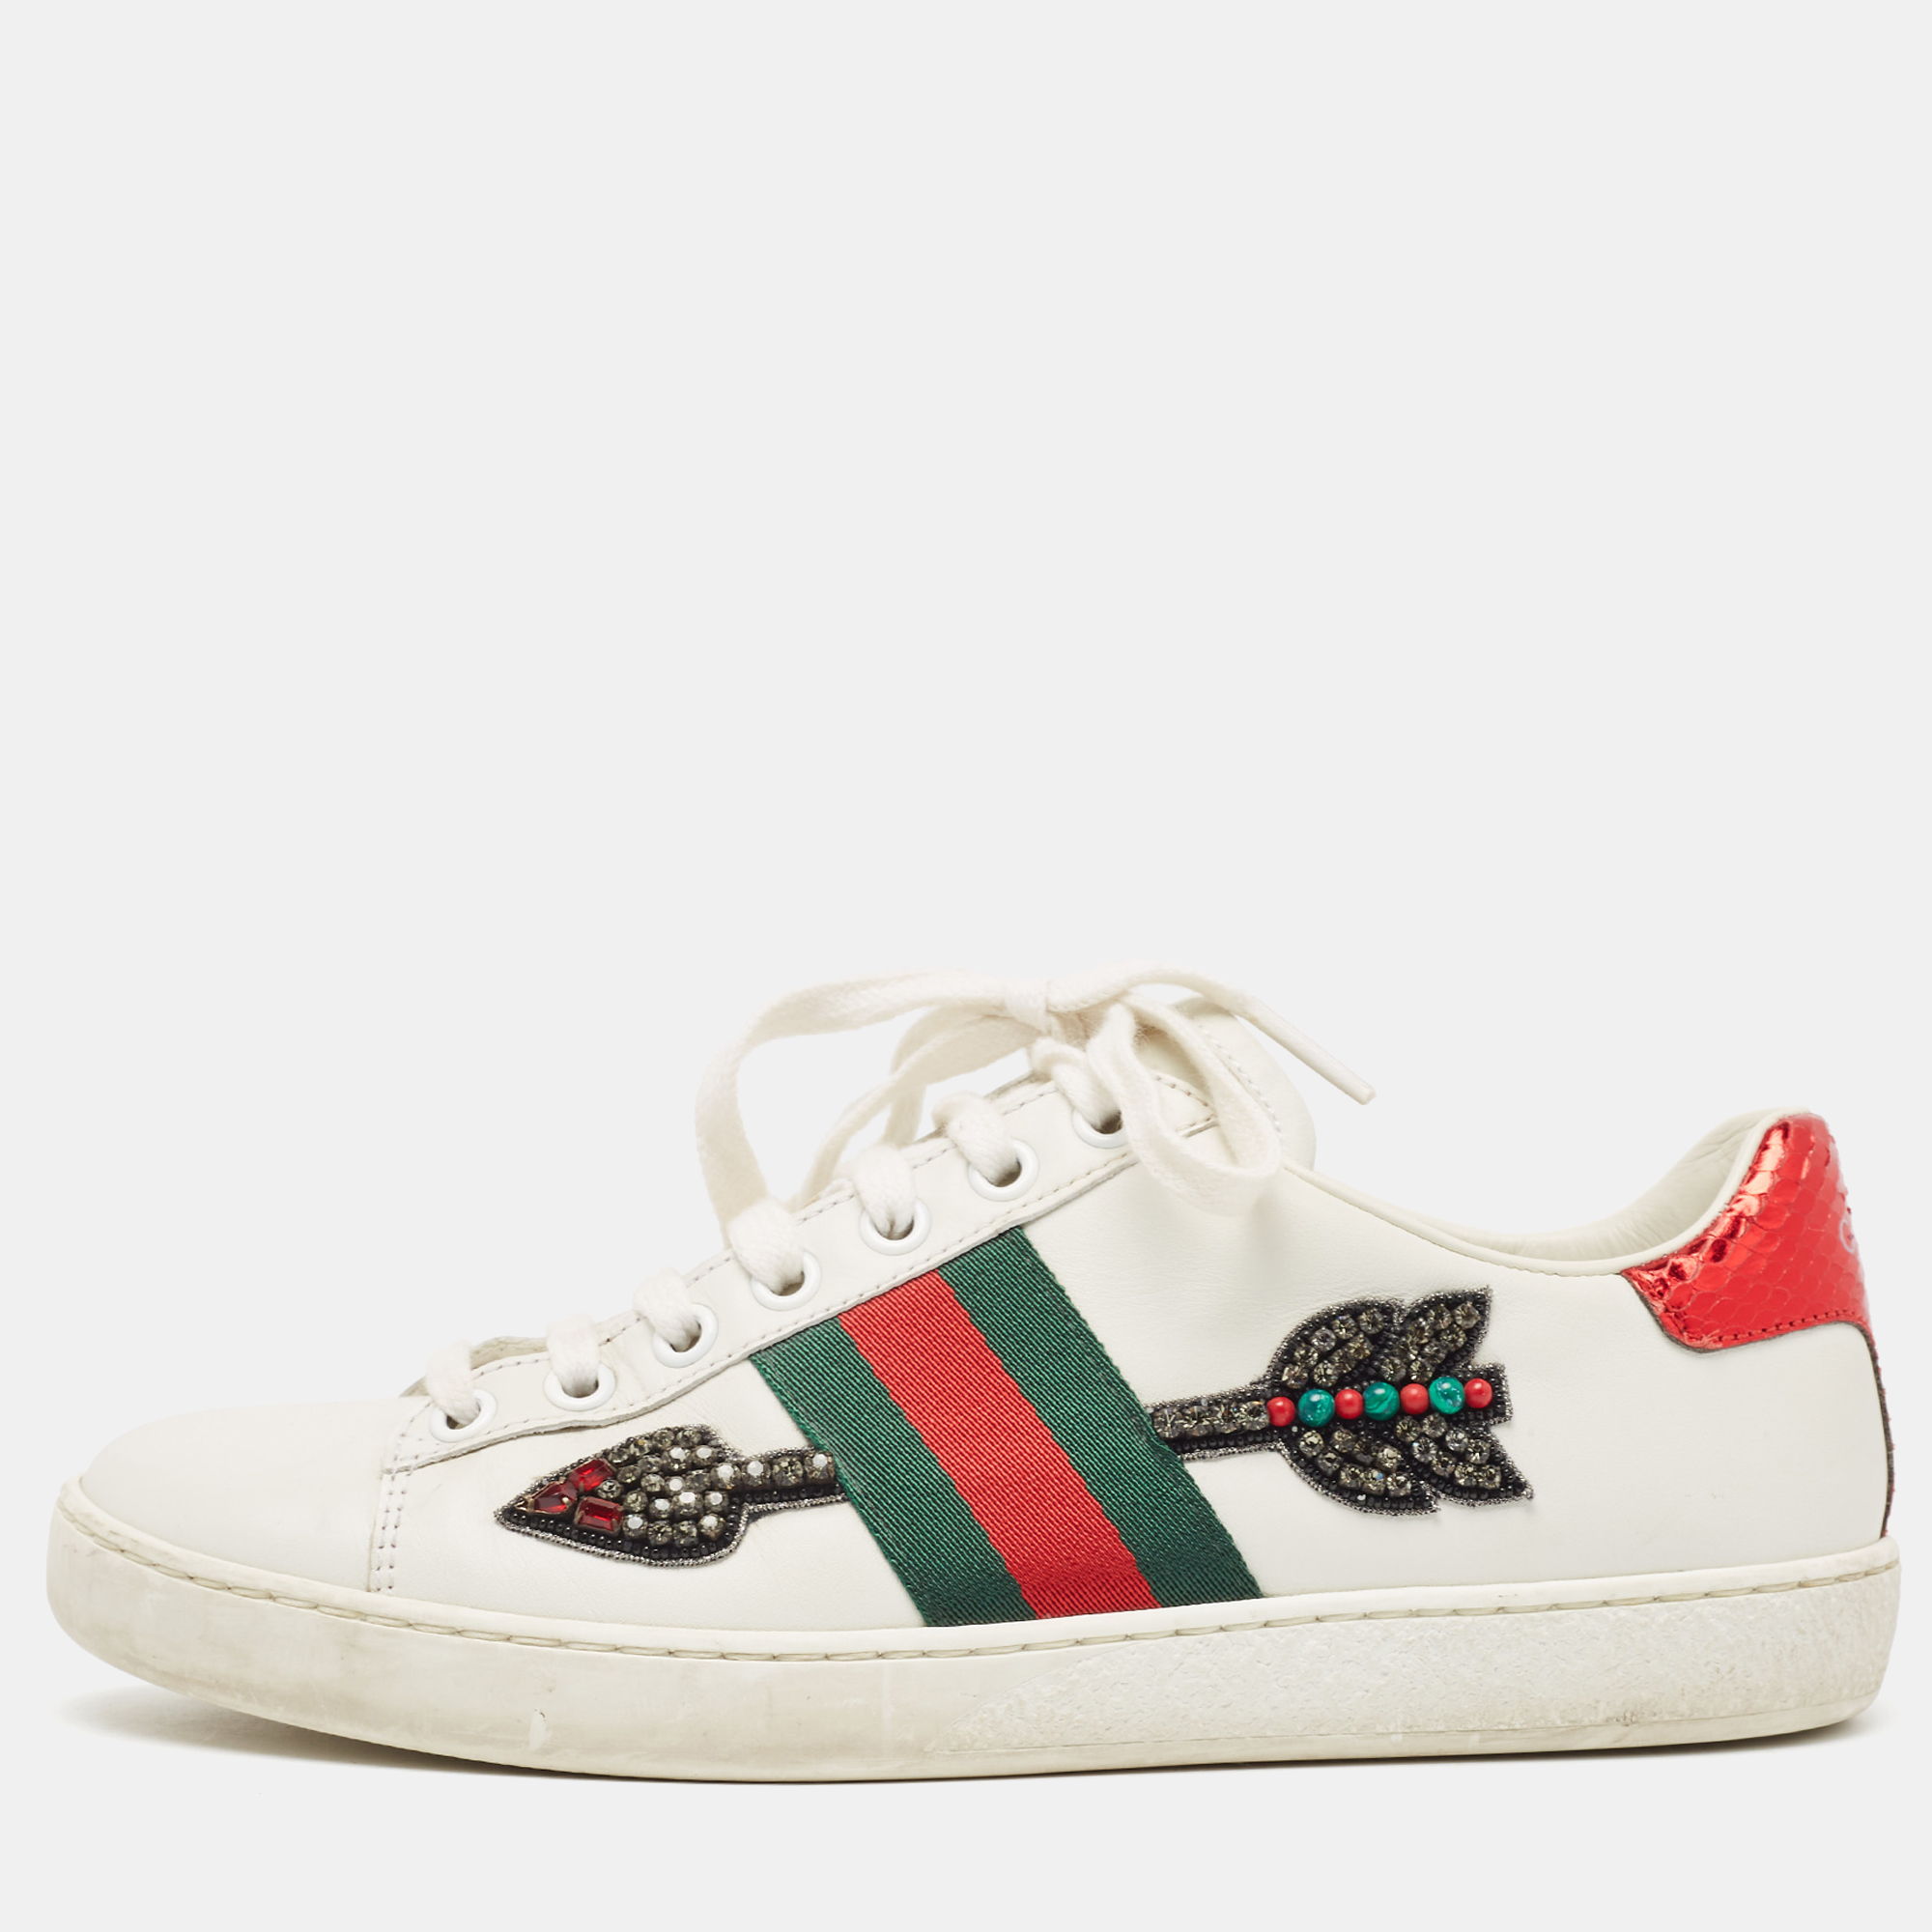 Gucci white leather embellished arrow ace sneakers size 36